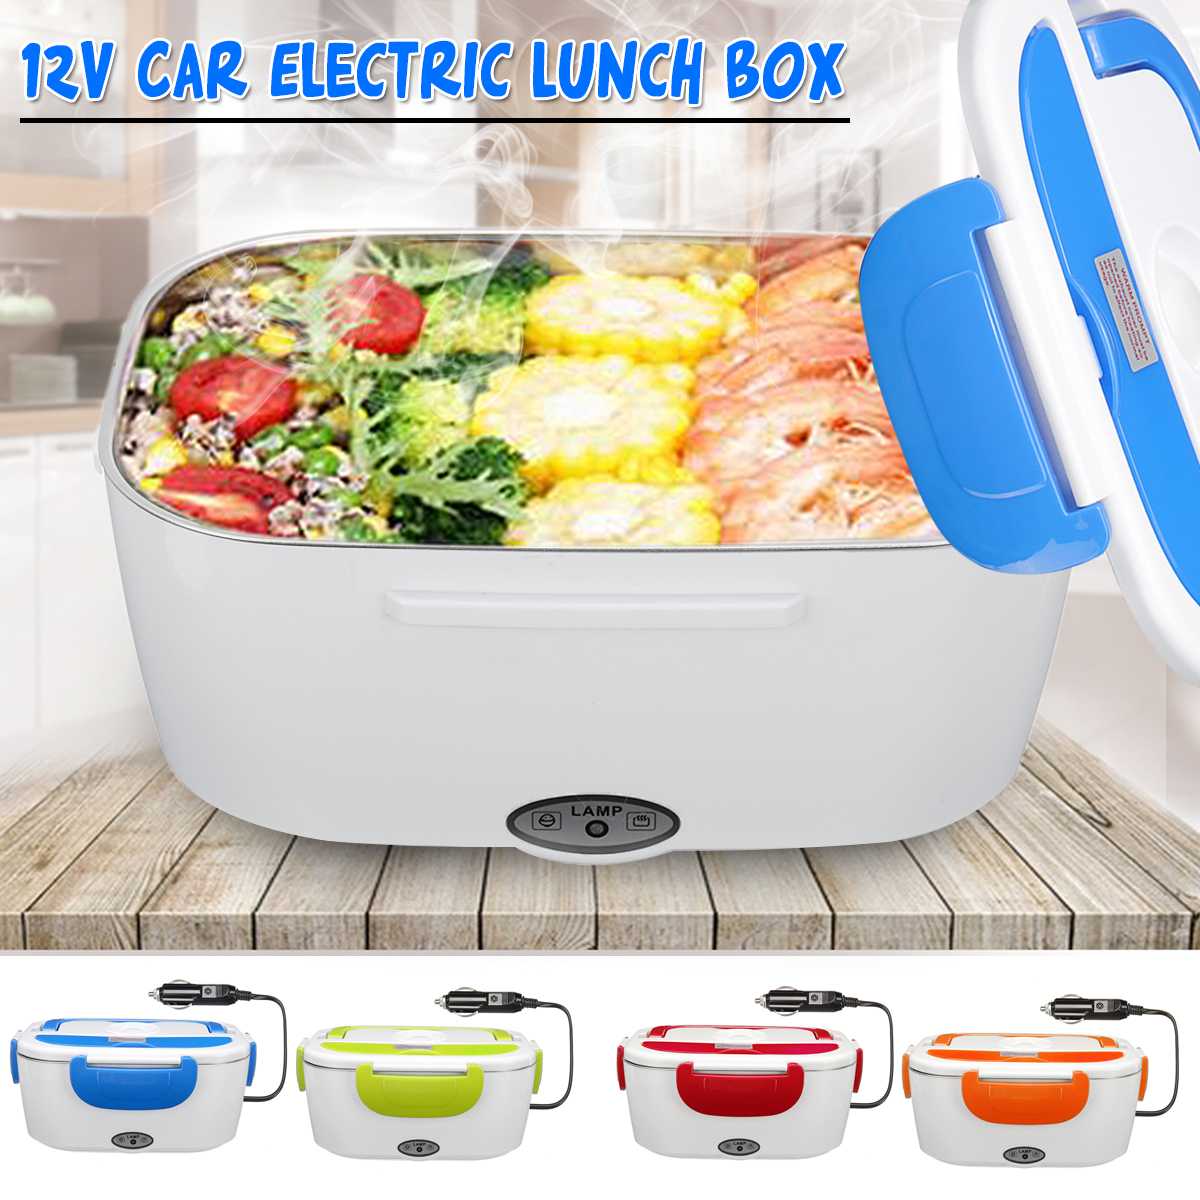 Portable Electric Heating Lunch Box Food Heater Bento Warmer Container Office 